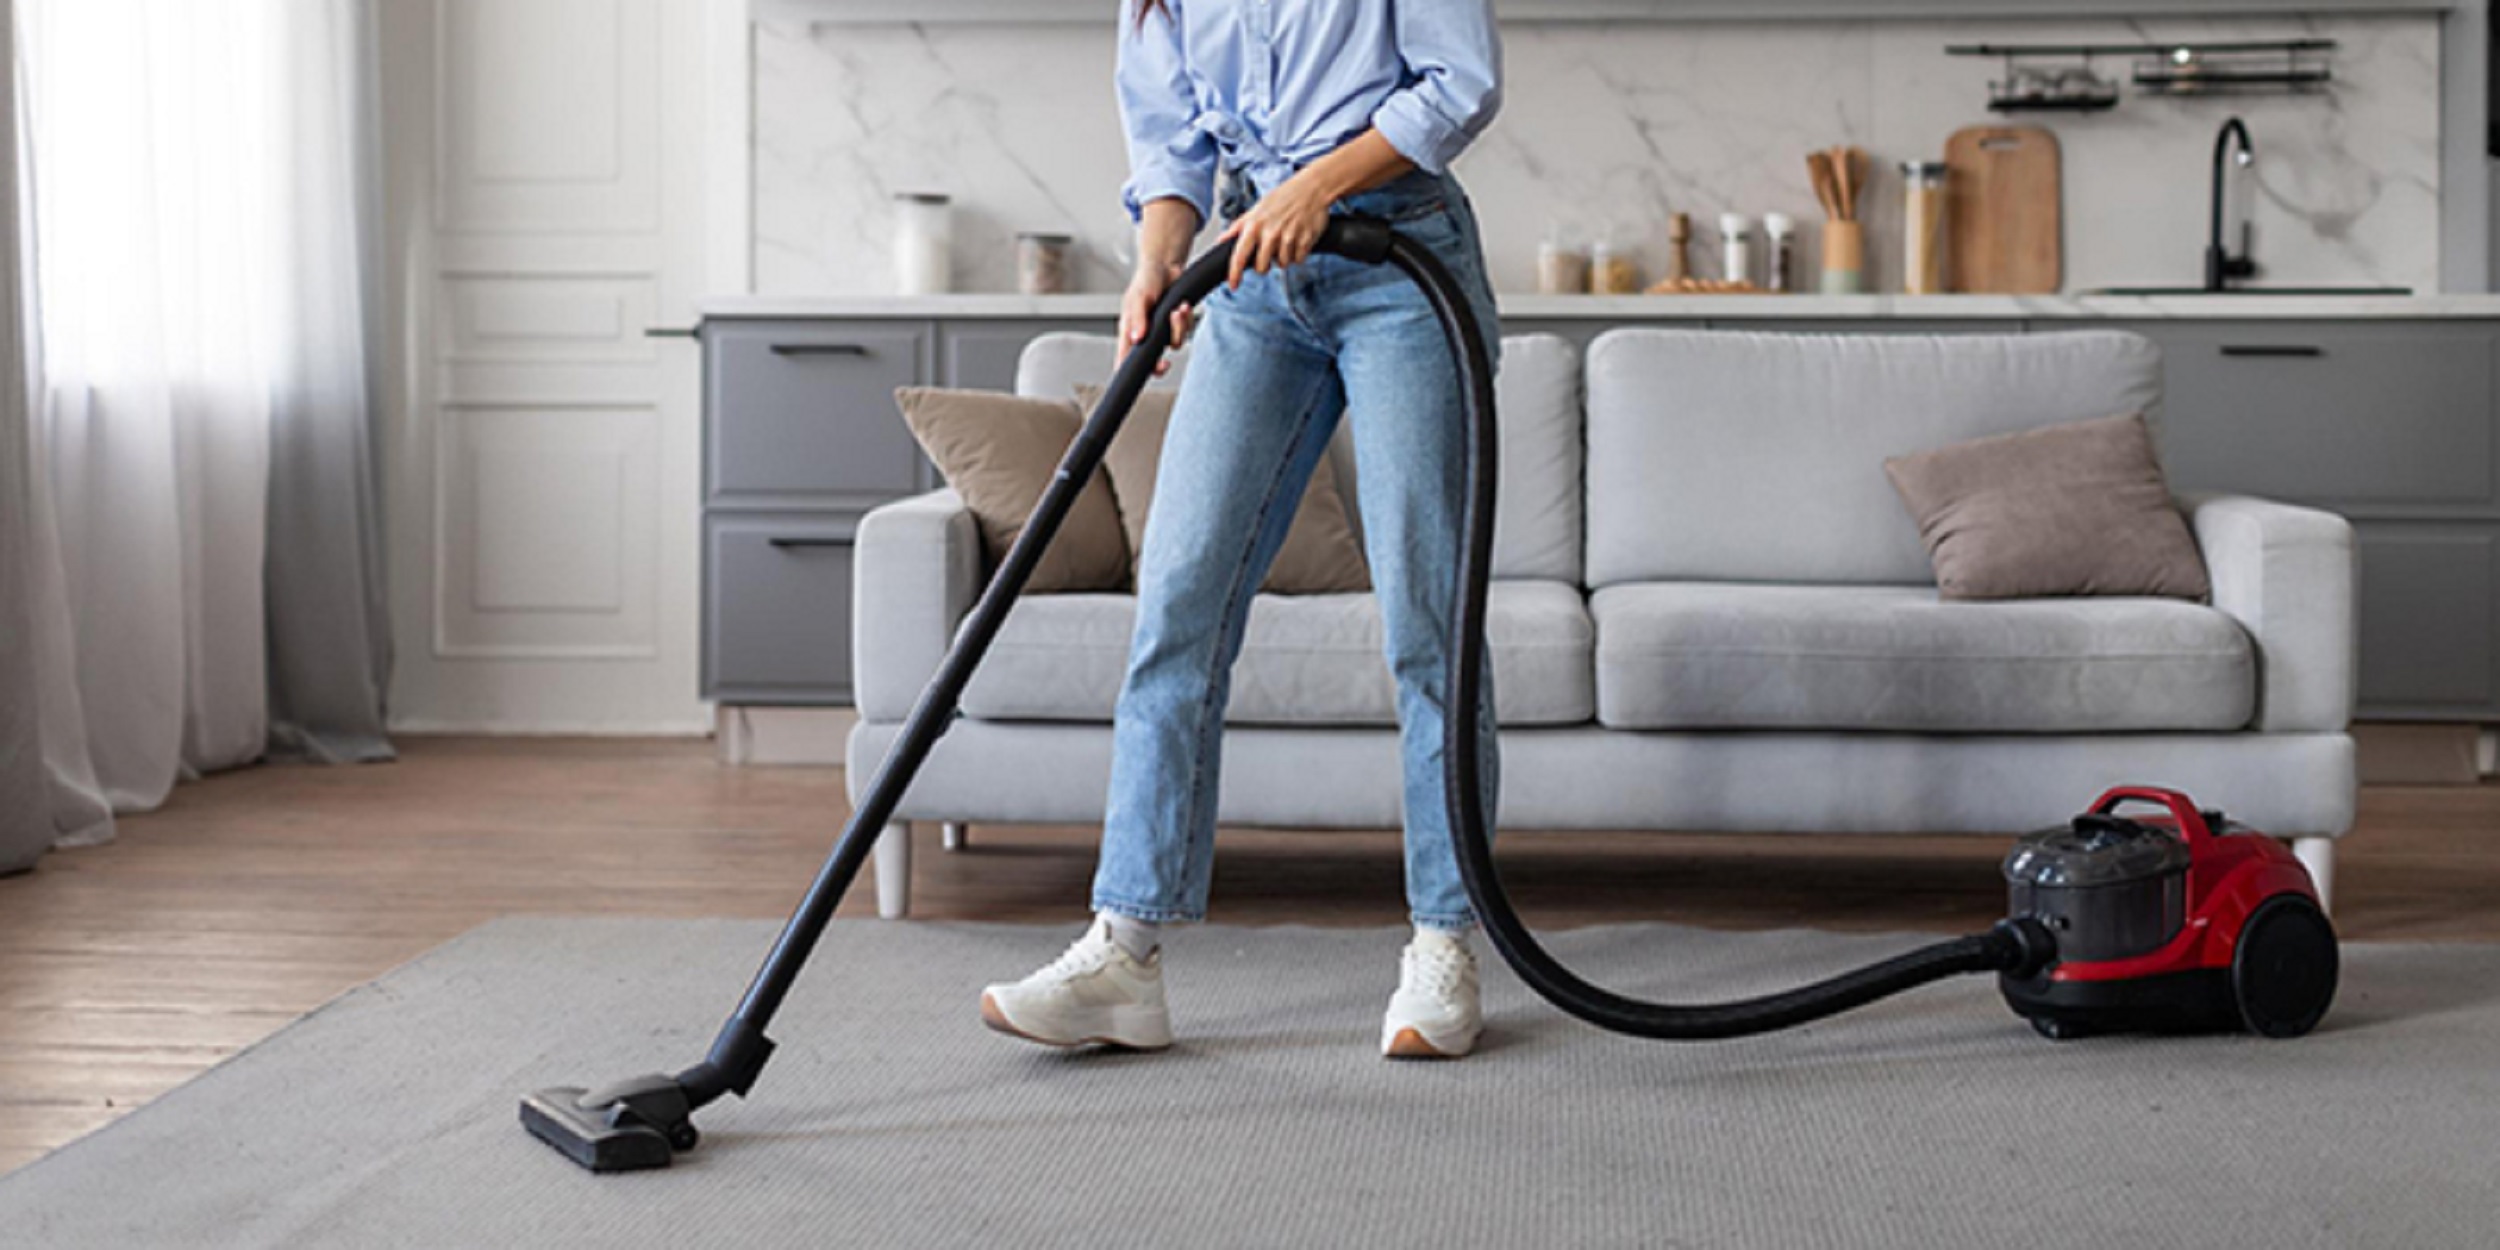 What Are the Best Cleaning Tips for End-of-Lease Success